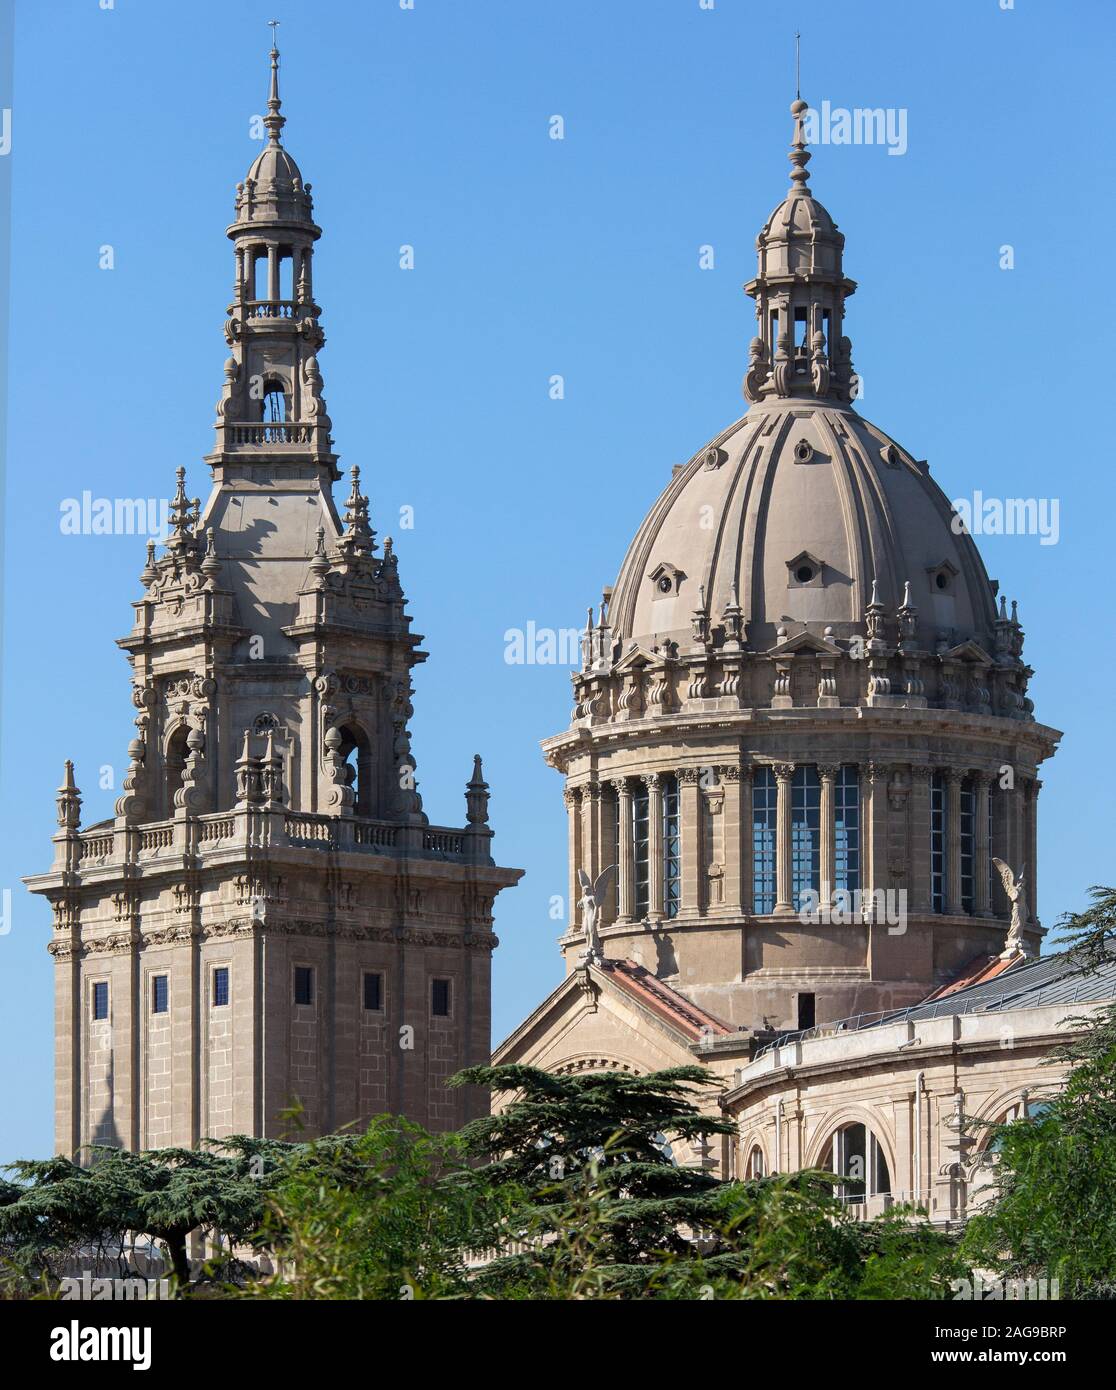 The National Palace (Museu National dArt de Catalunya) in the Montjuic district of Barcelona in the Catalonia region of Spain. Stock Photo